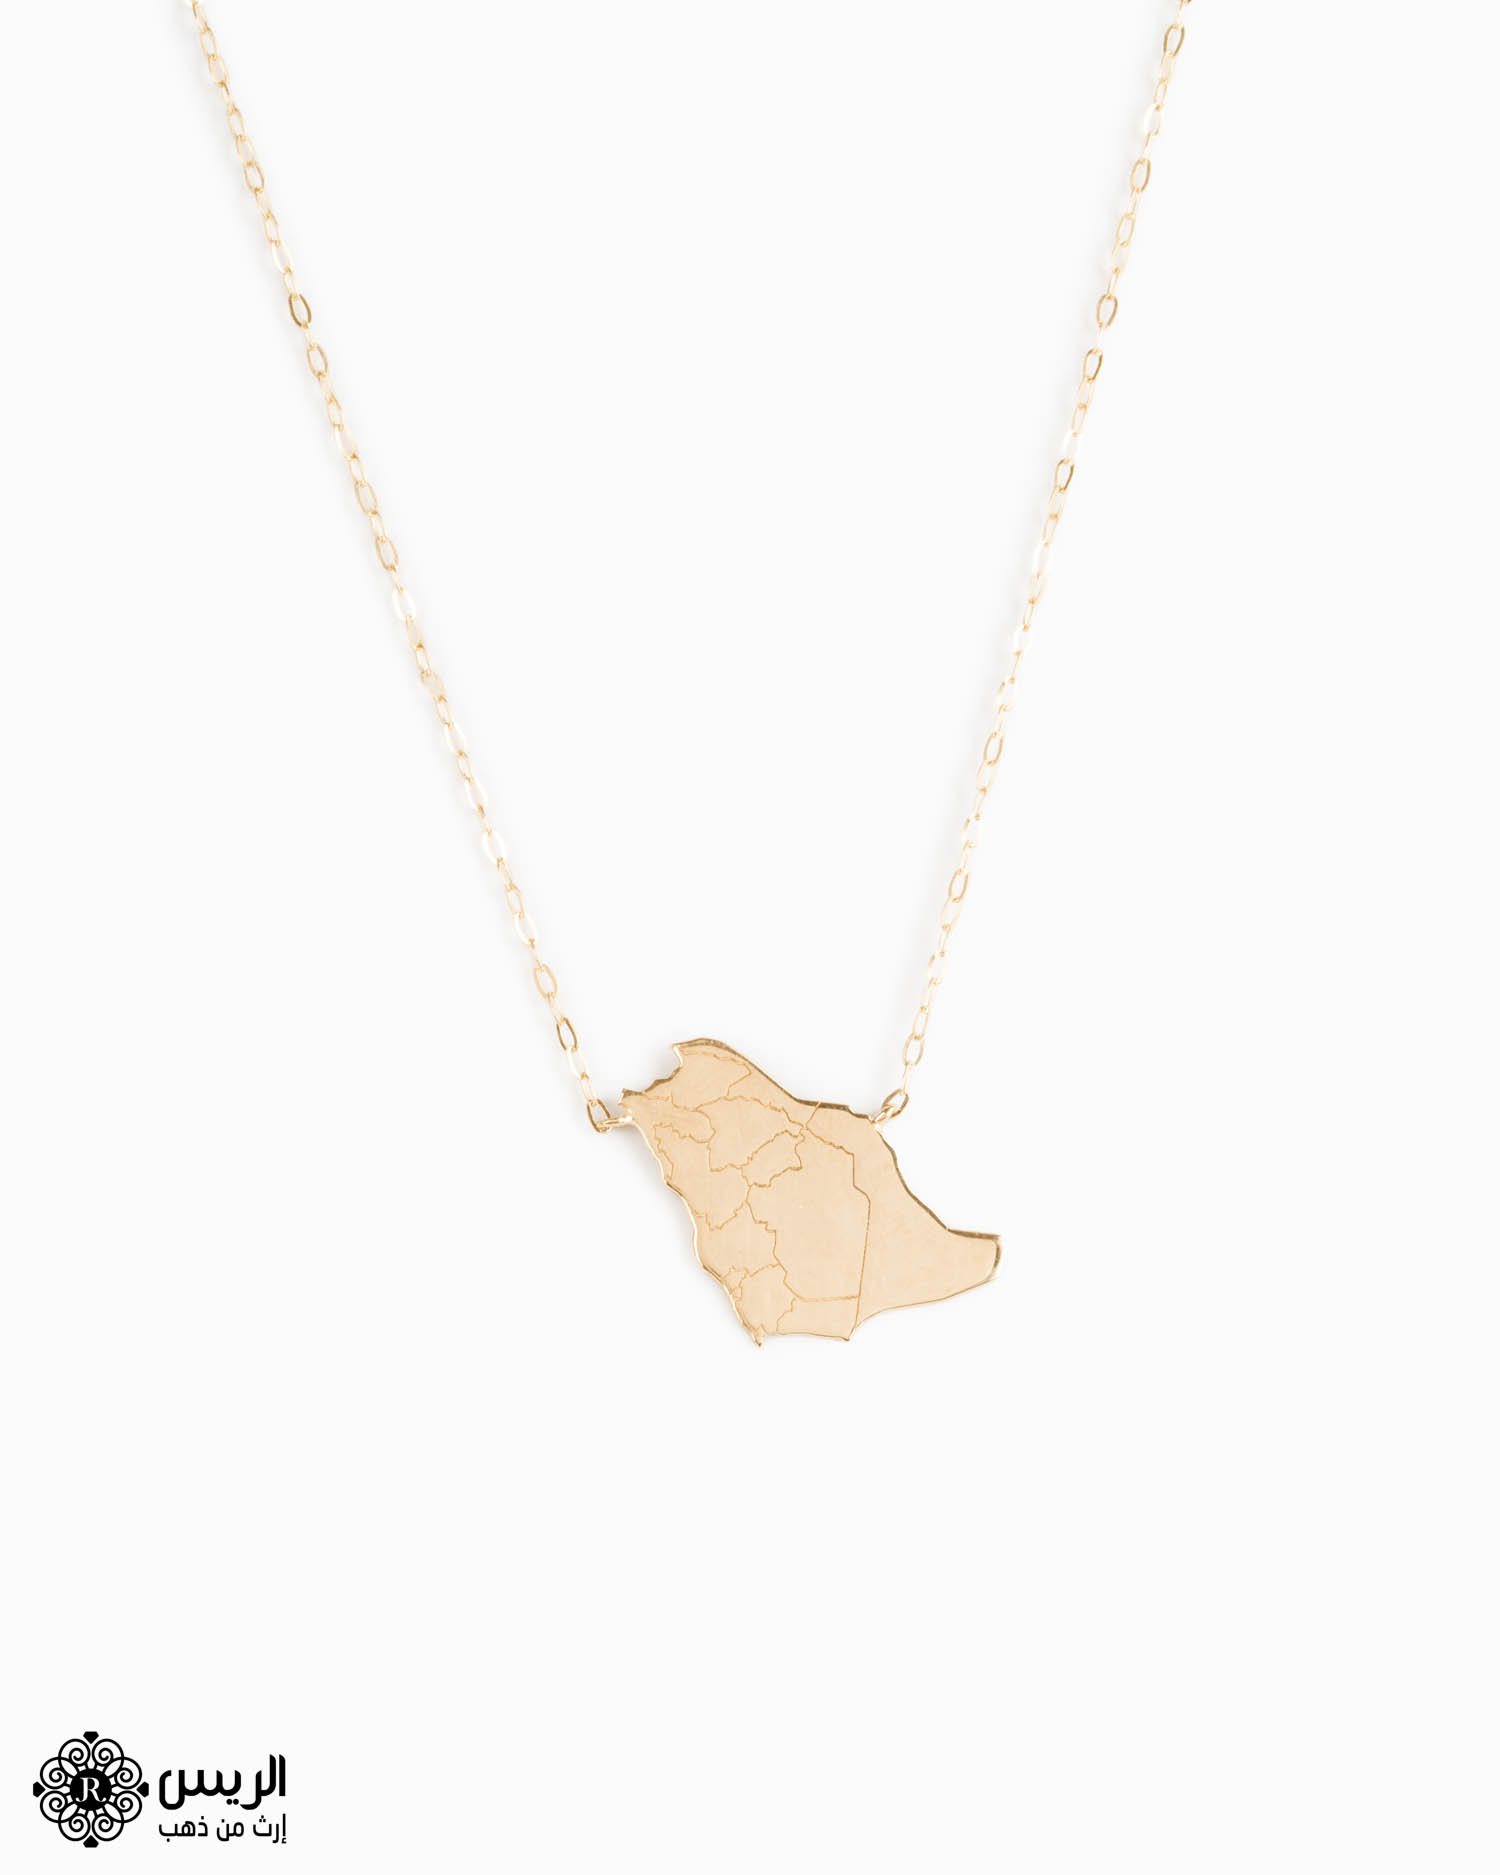 Necklace With Chain KSA Map